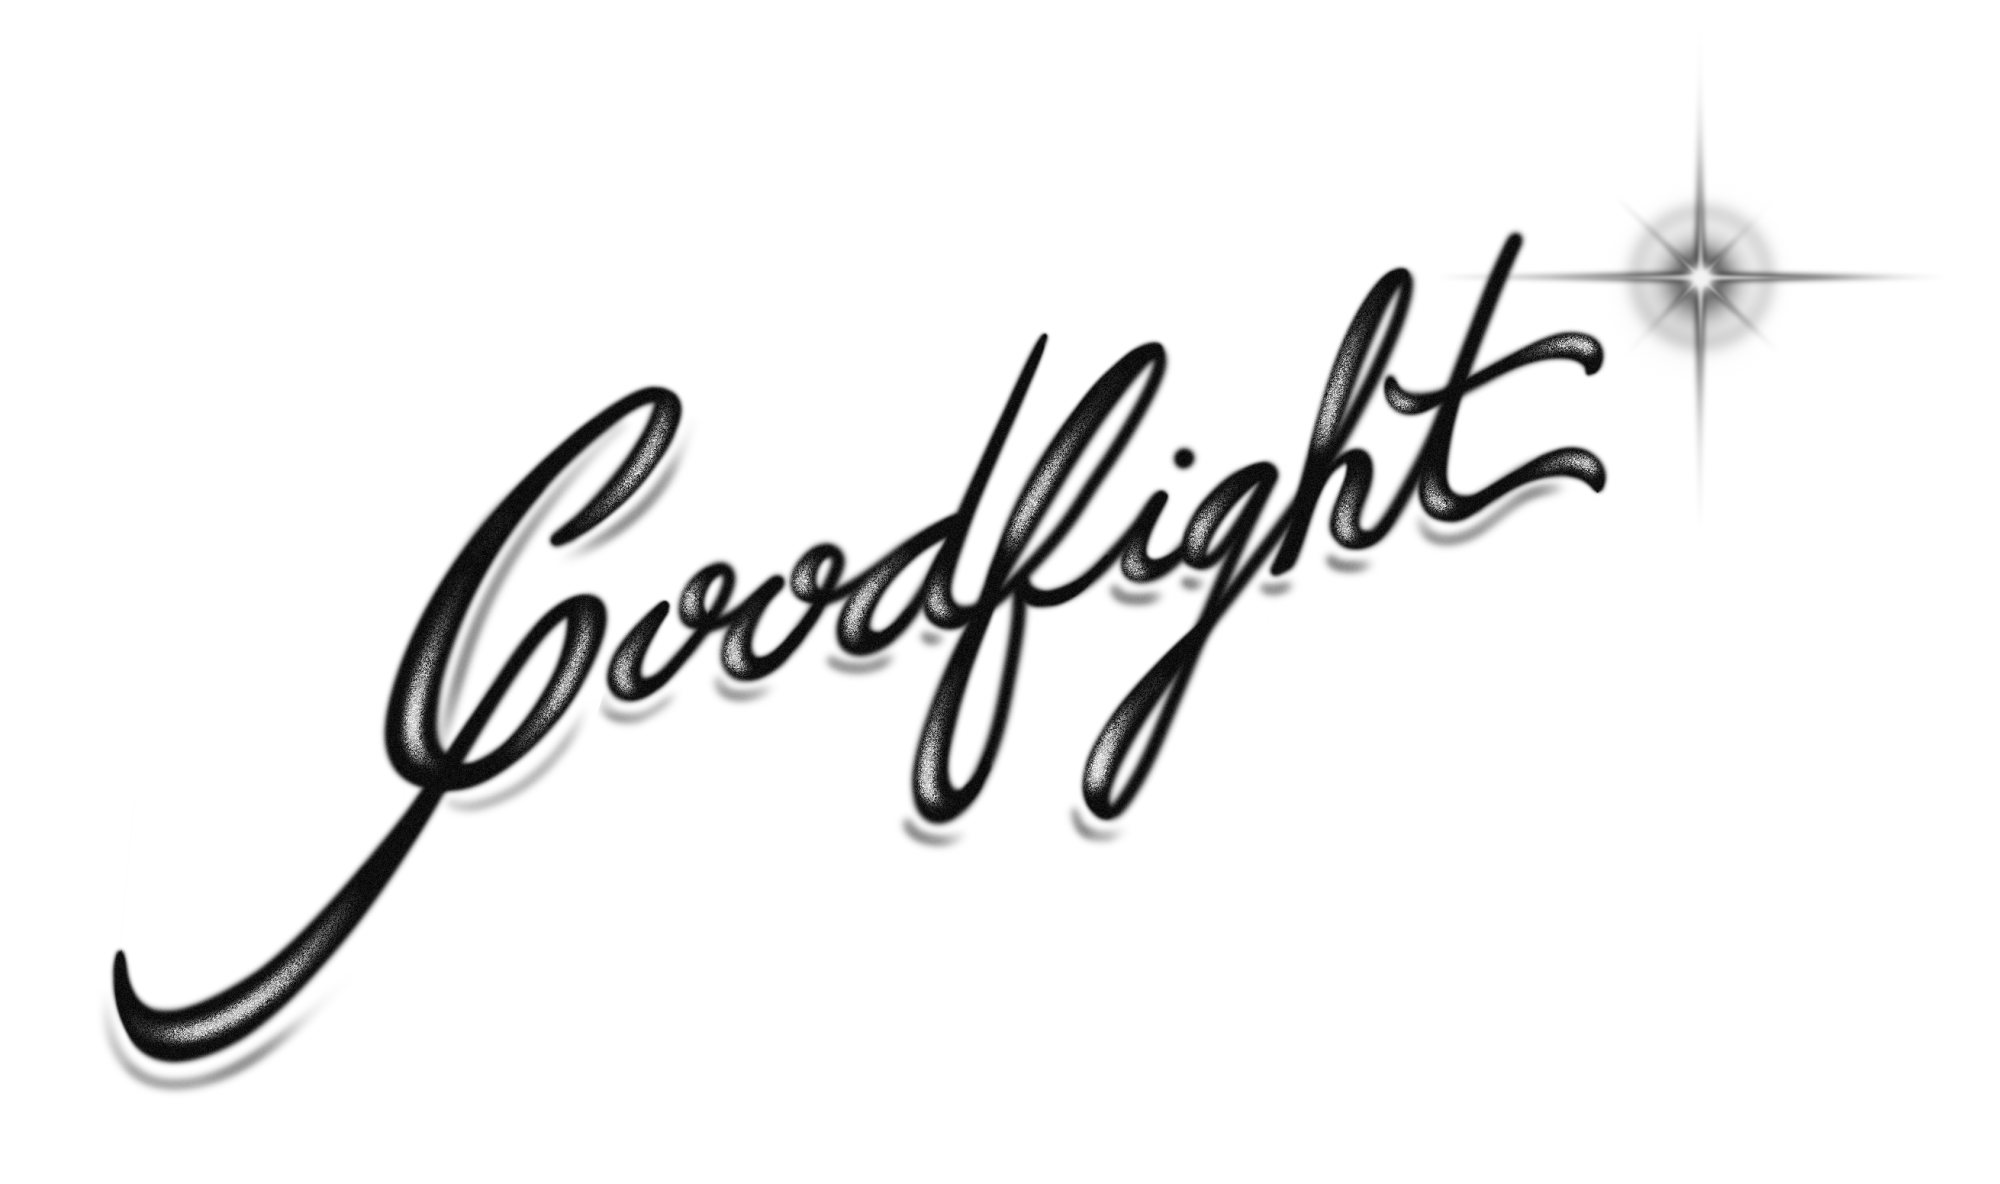 script that reads “Goodfight” accented with a flare graphic